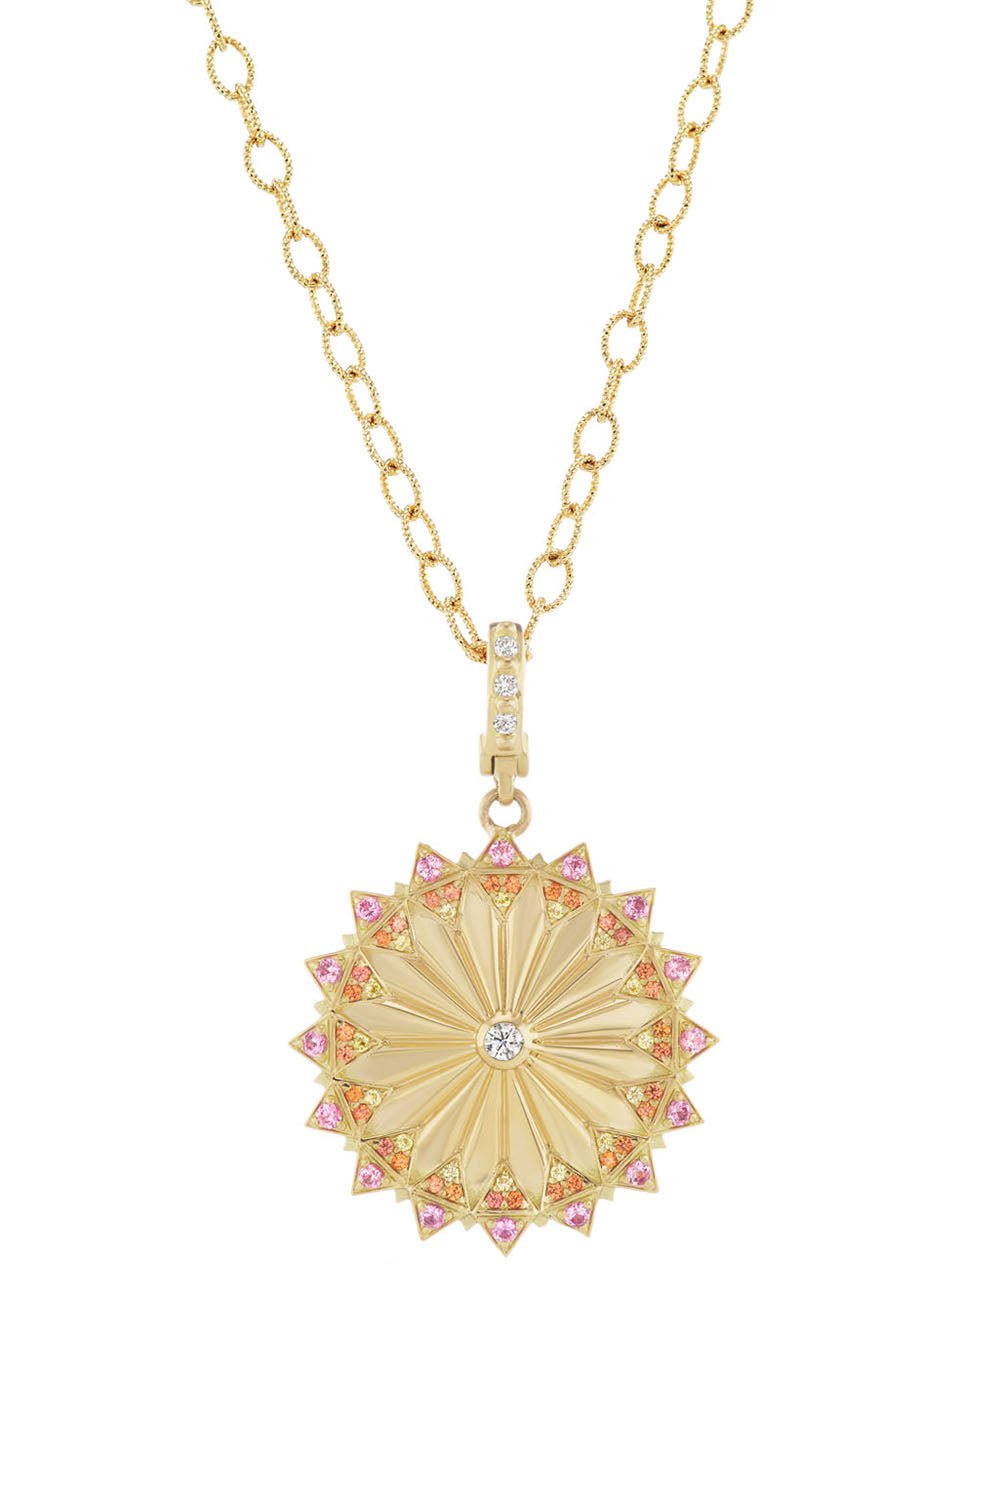 ORLY MARCEL-BE THE LIGHT SAPPHIRE NECKLACE-YELLOW GOLD